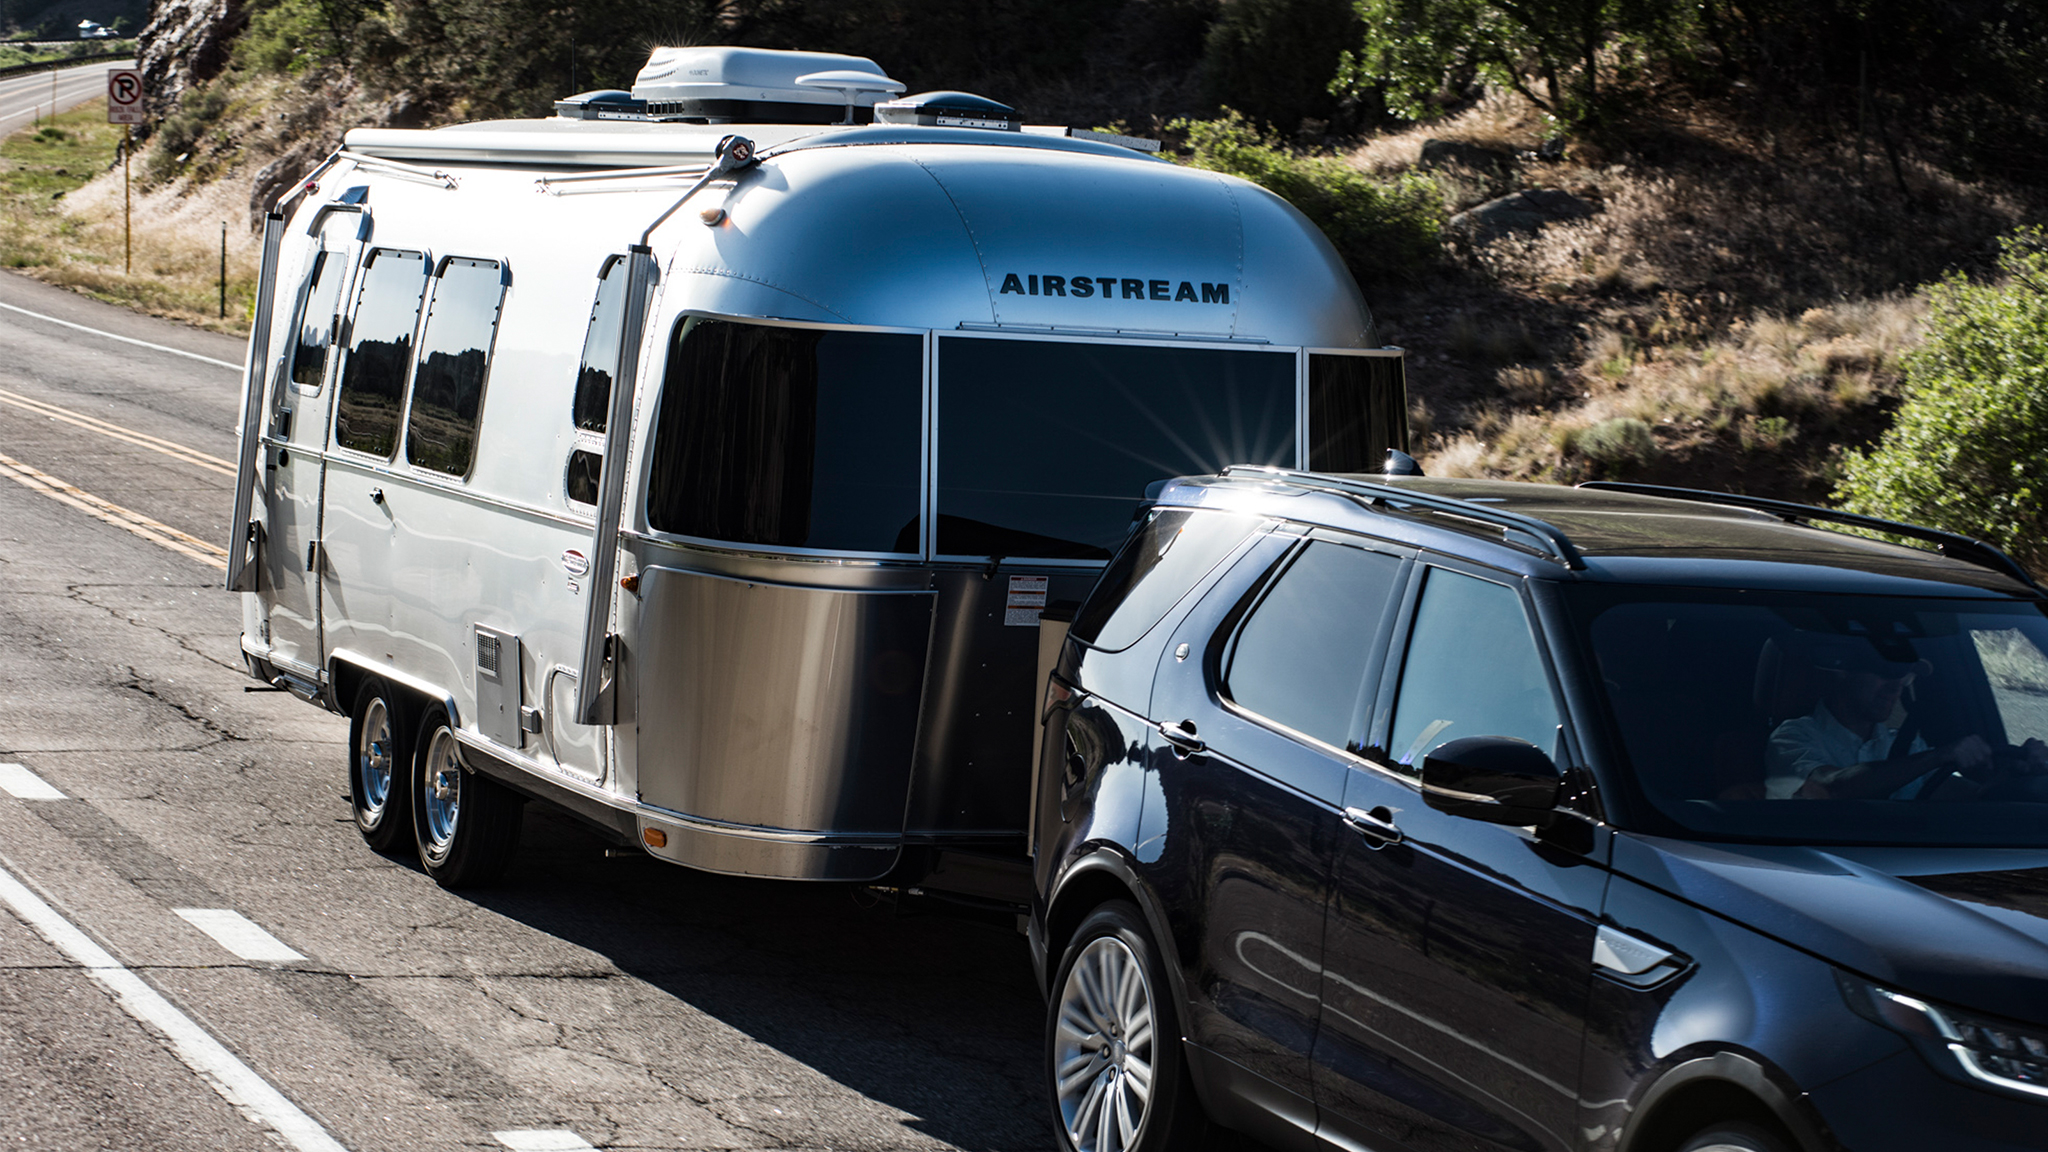 Single Axle or Double Axle Travel Trailer? - Comparing Airstreams by Axle